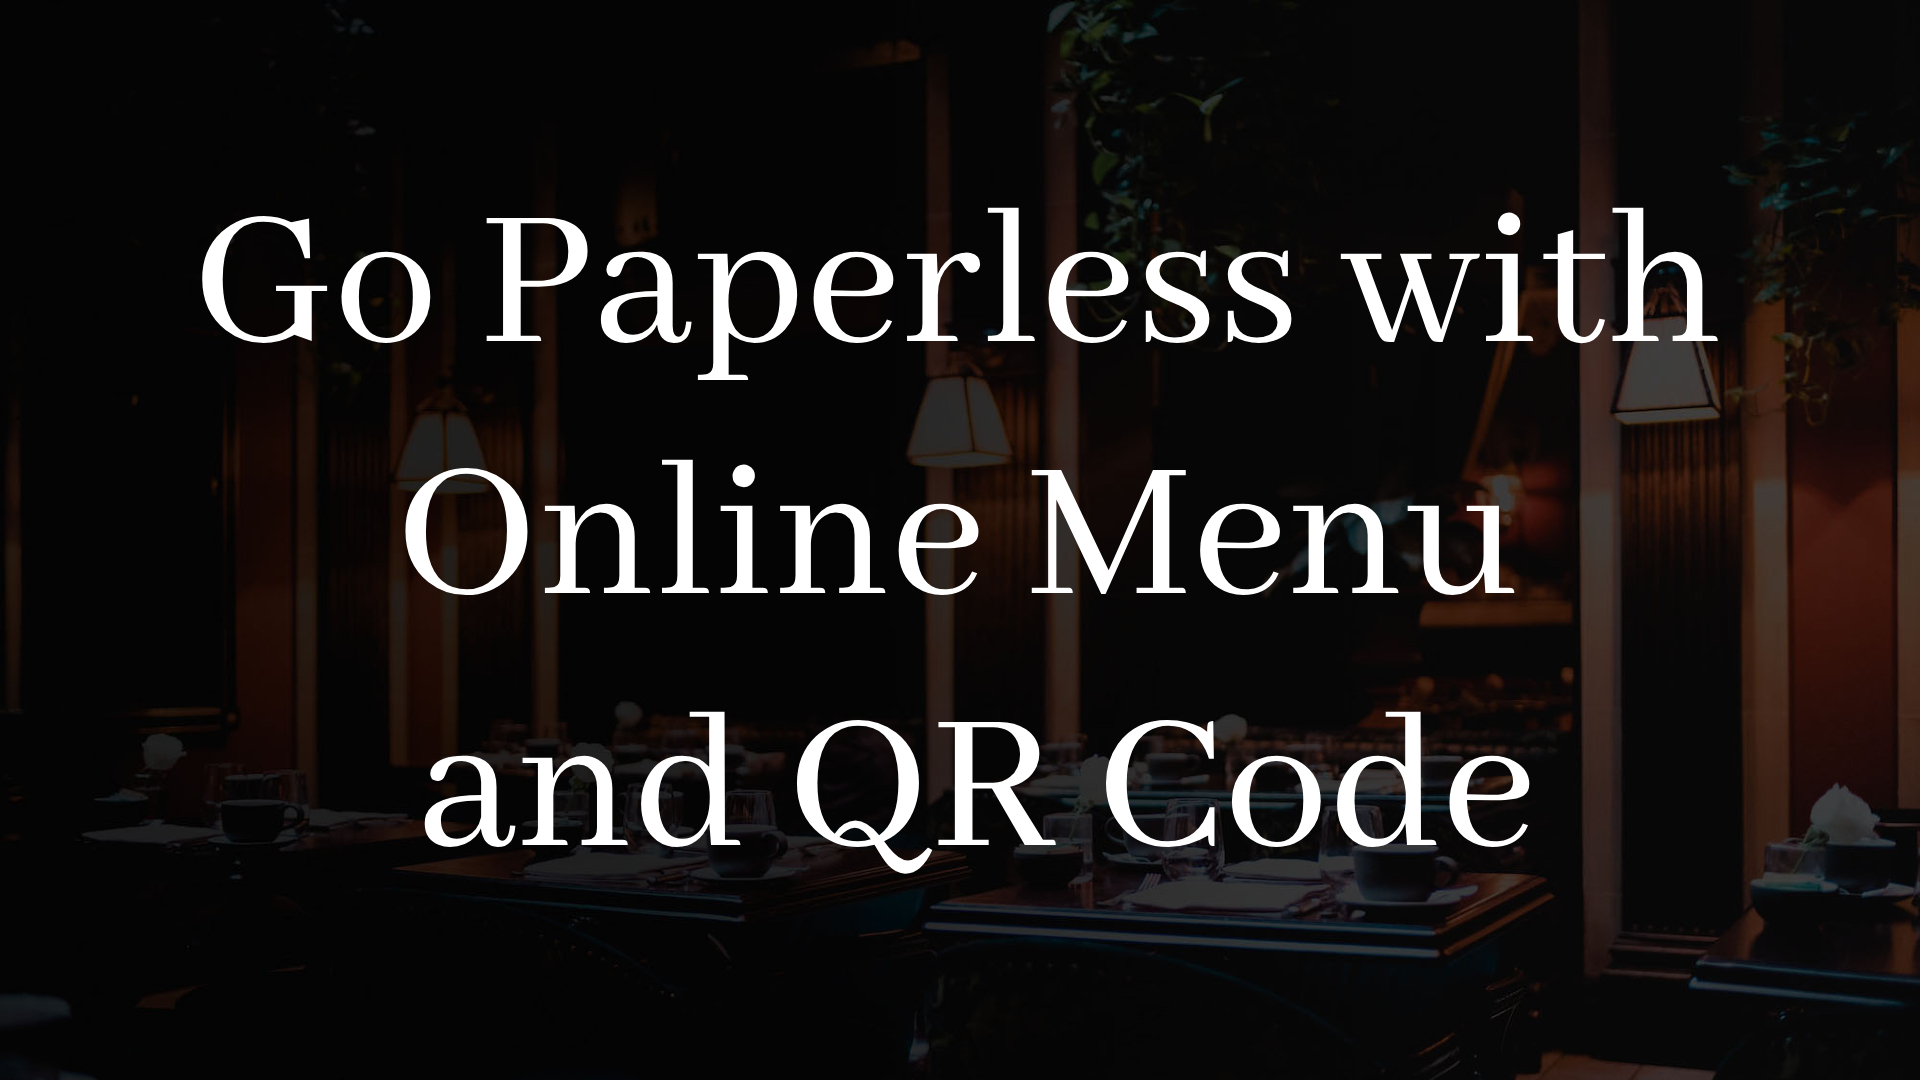 Go Paperless with Online Menu and QR Code